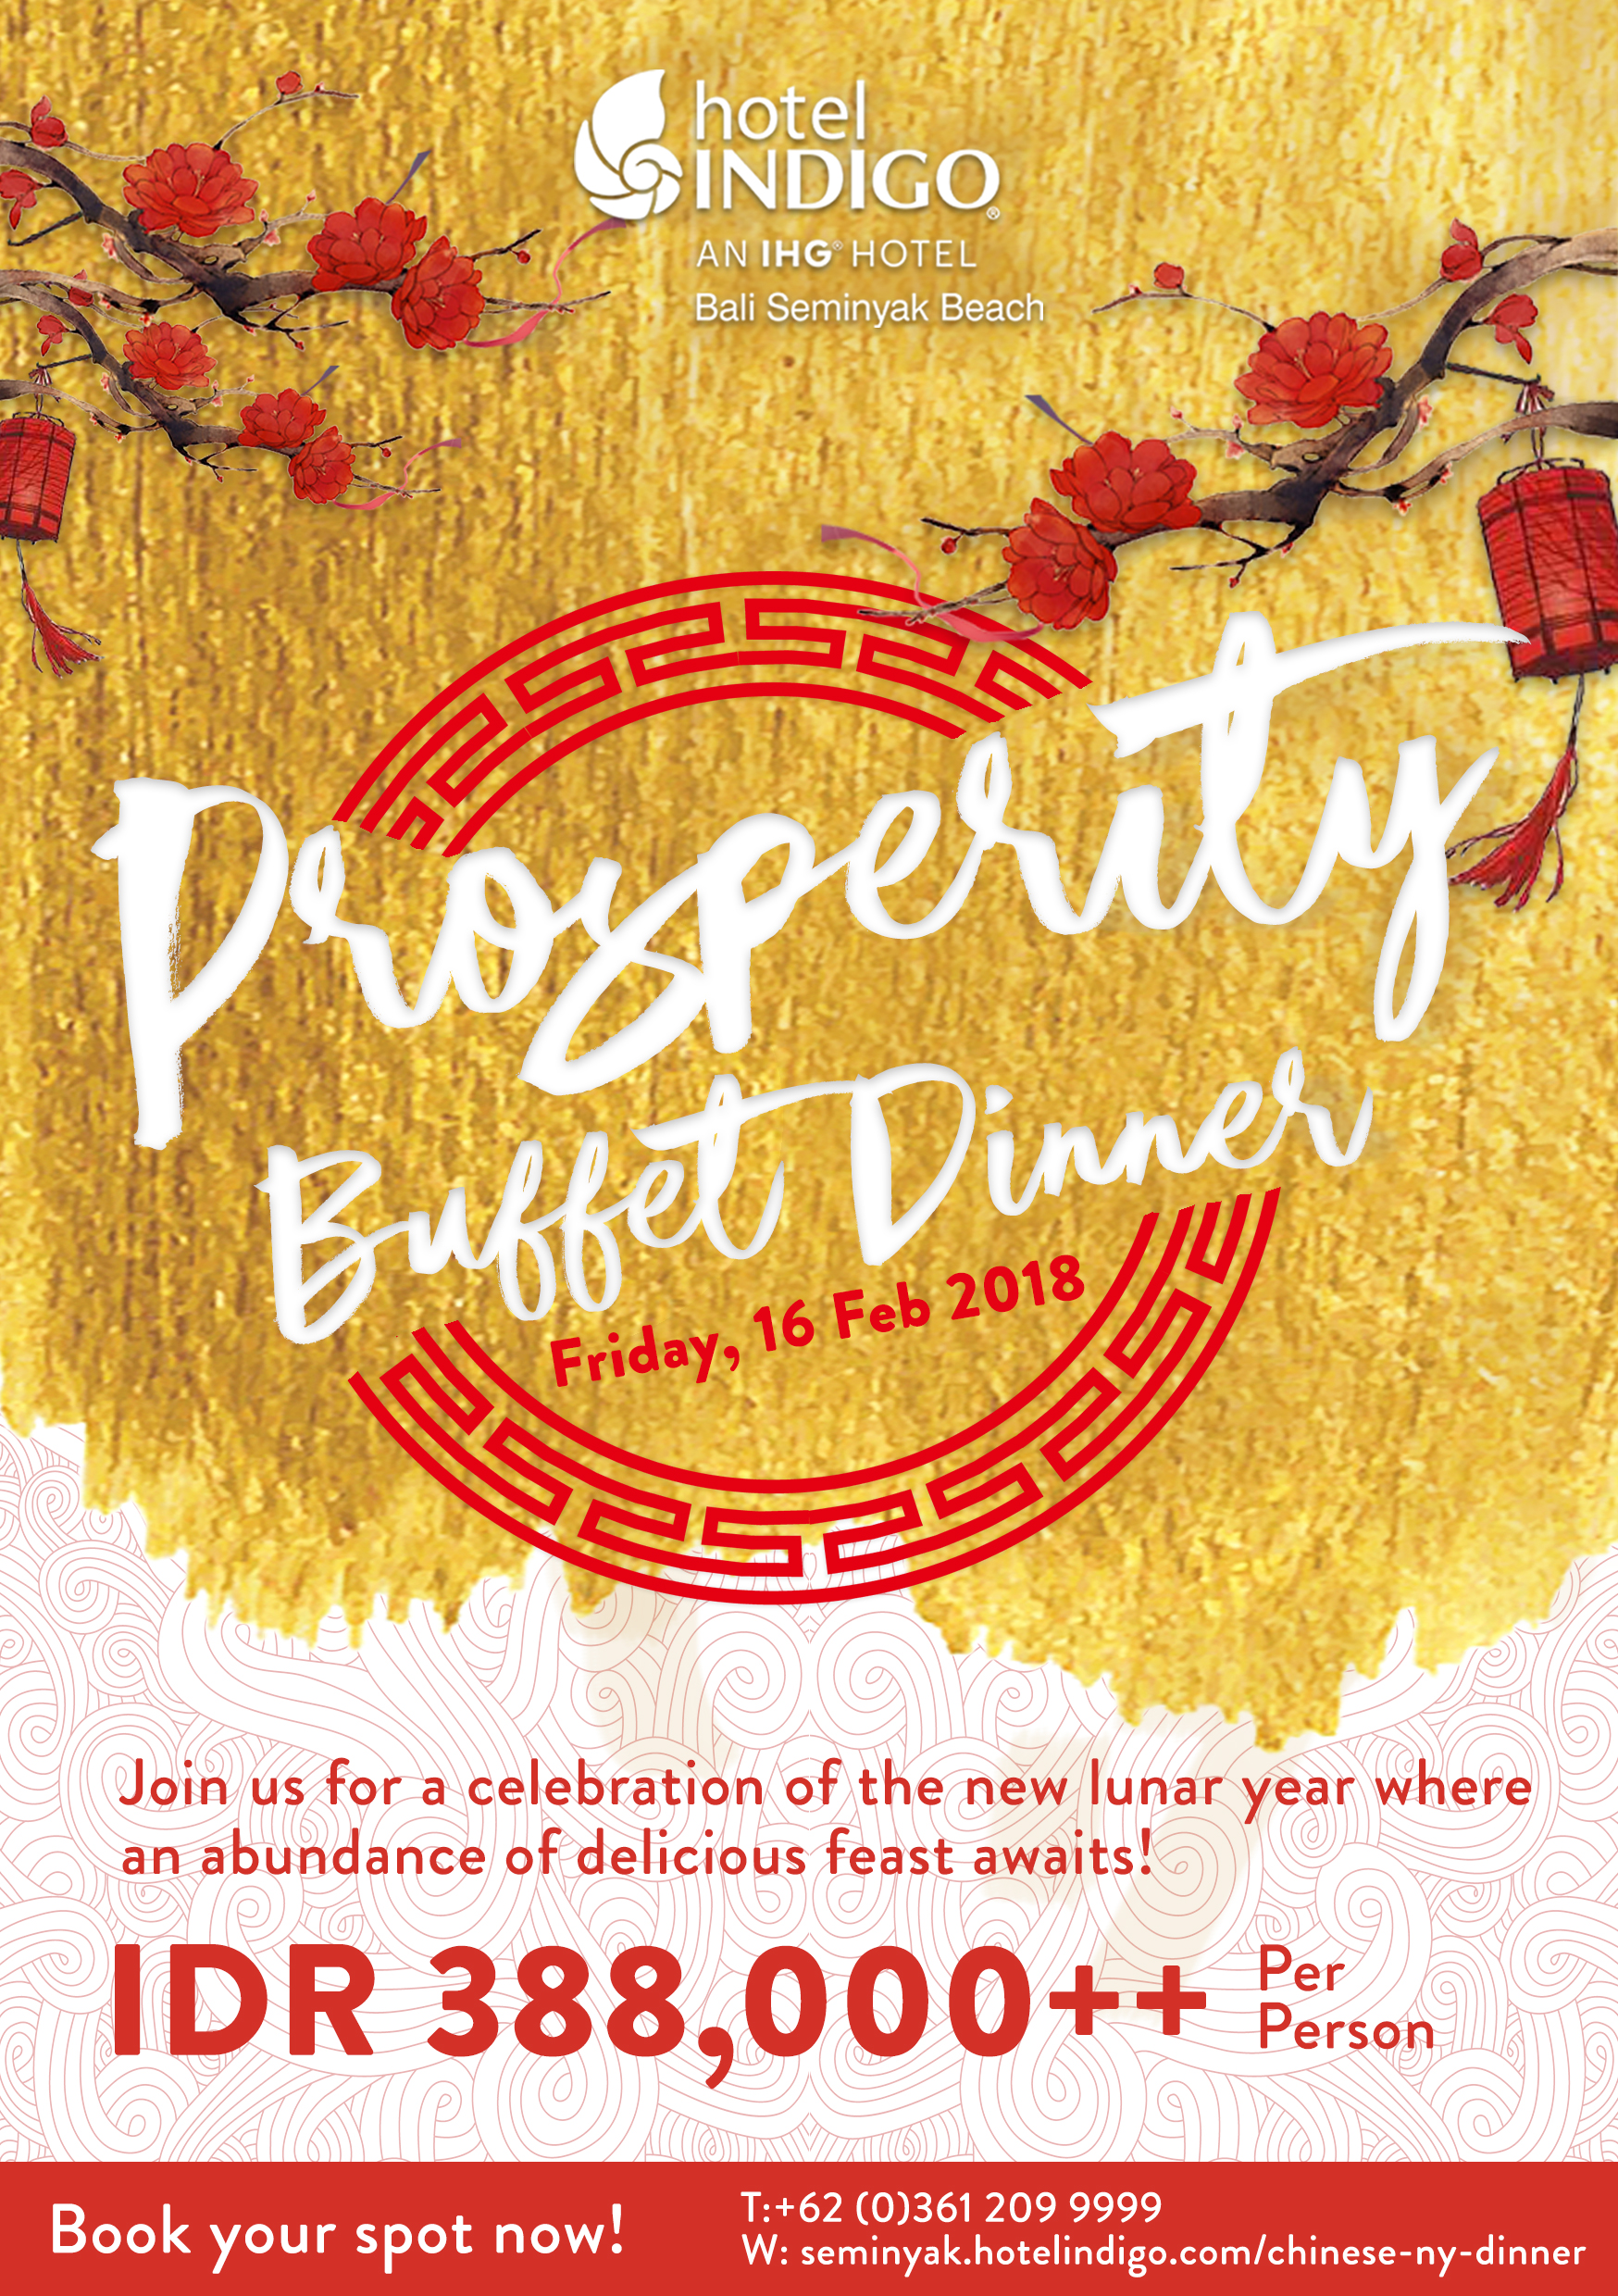 Celebrate The New And Prosperous Lunar Year! | The Bali Bible